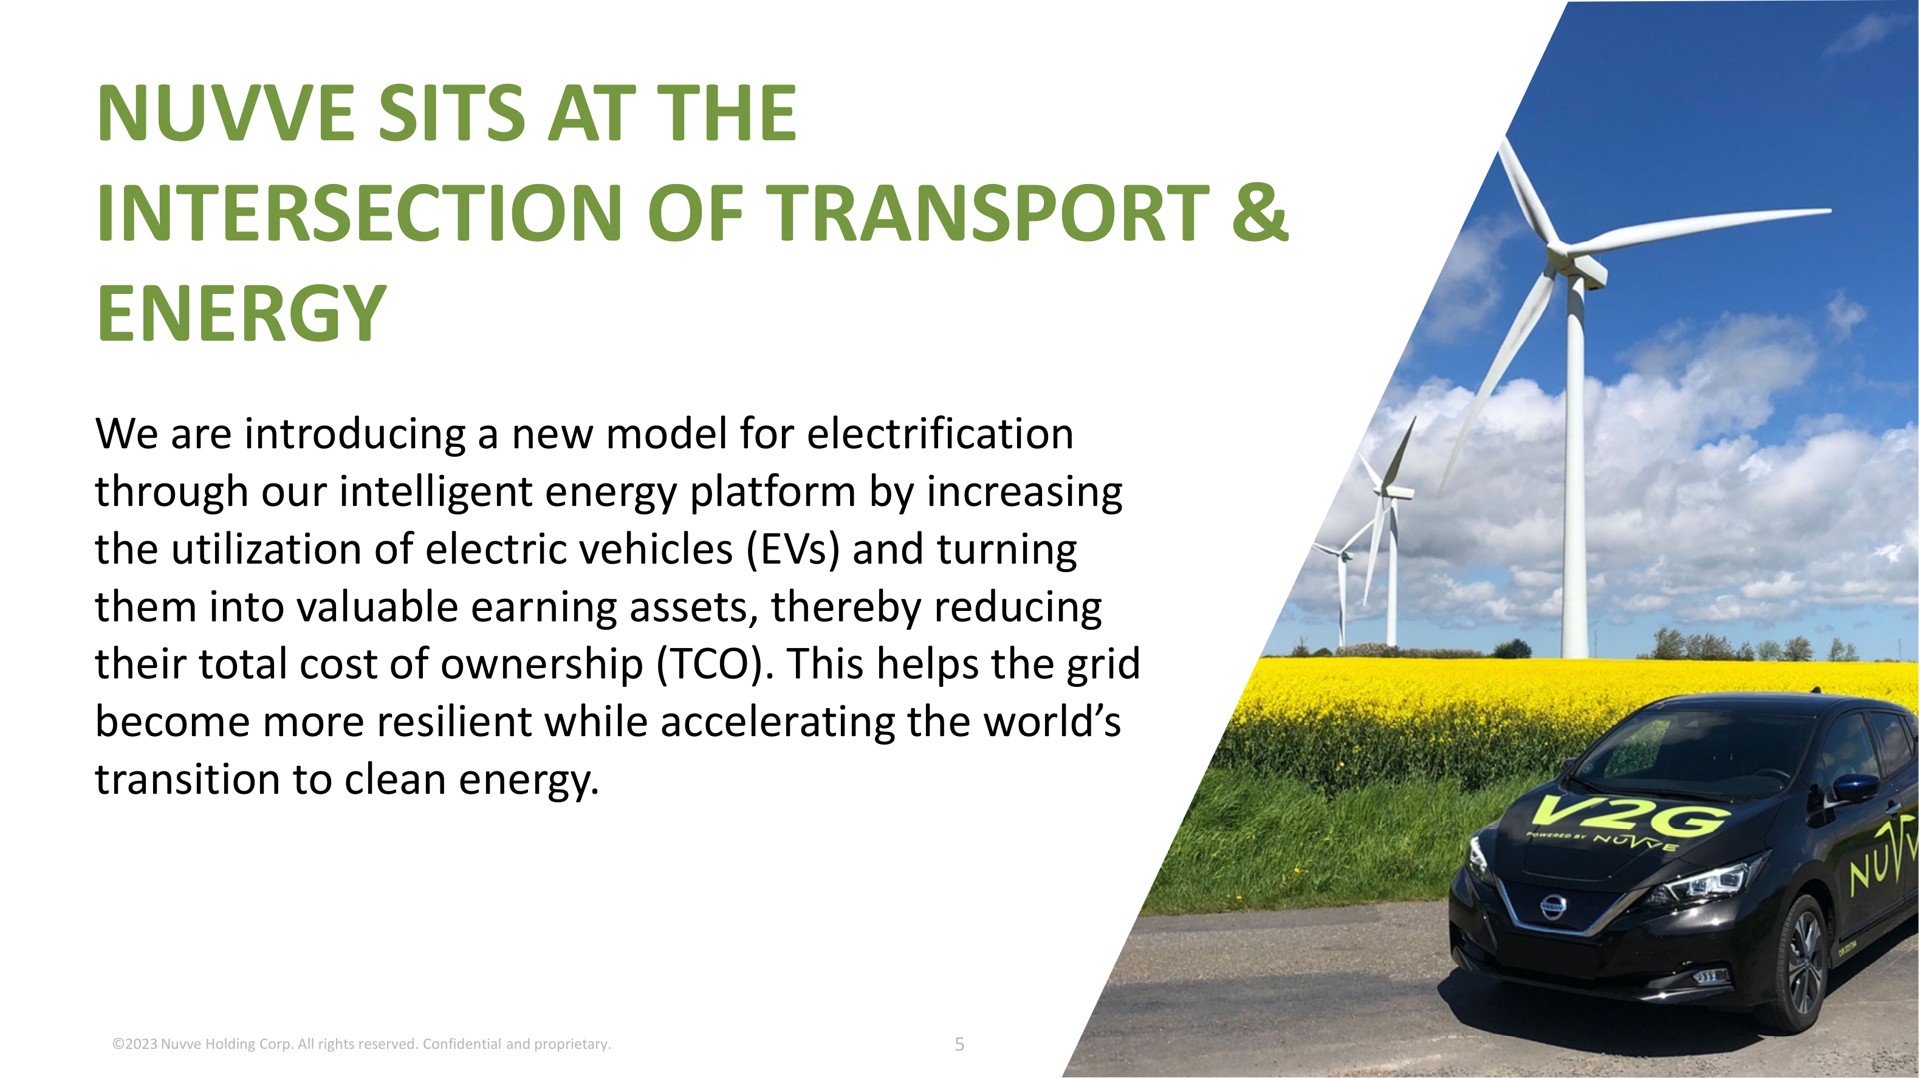 sits at the intersection of transport energy we are introducing a new model for electrification through our intelligent energy platform by increasing the utilization of electric vehicles and turning them into valuable earning assets thereby reducing their total cost of ownership this helps the grid become more resilient while accelerating the world transition to clean energy | Nuvve